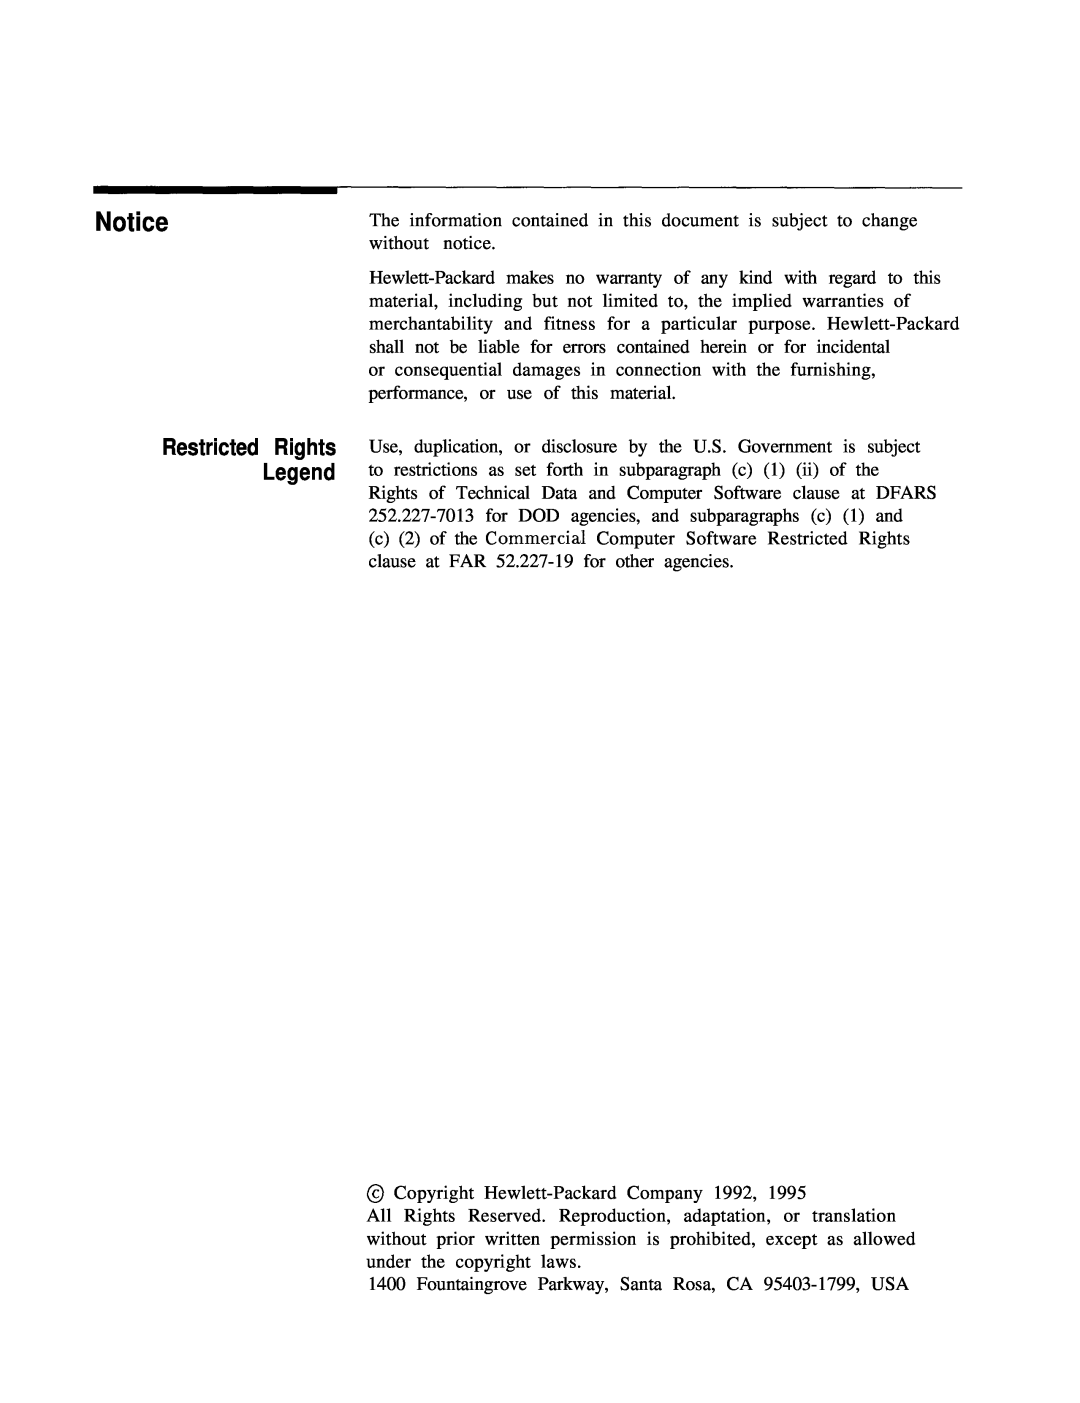 HP 22A, 83620A, 24A manual Restricted Rights 